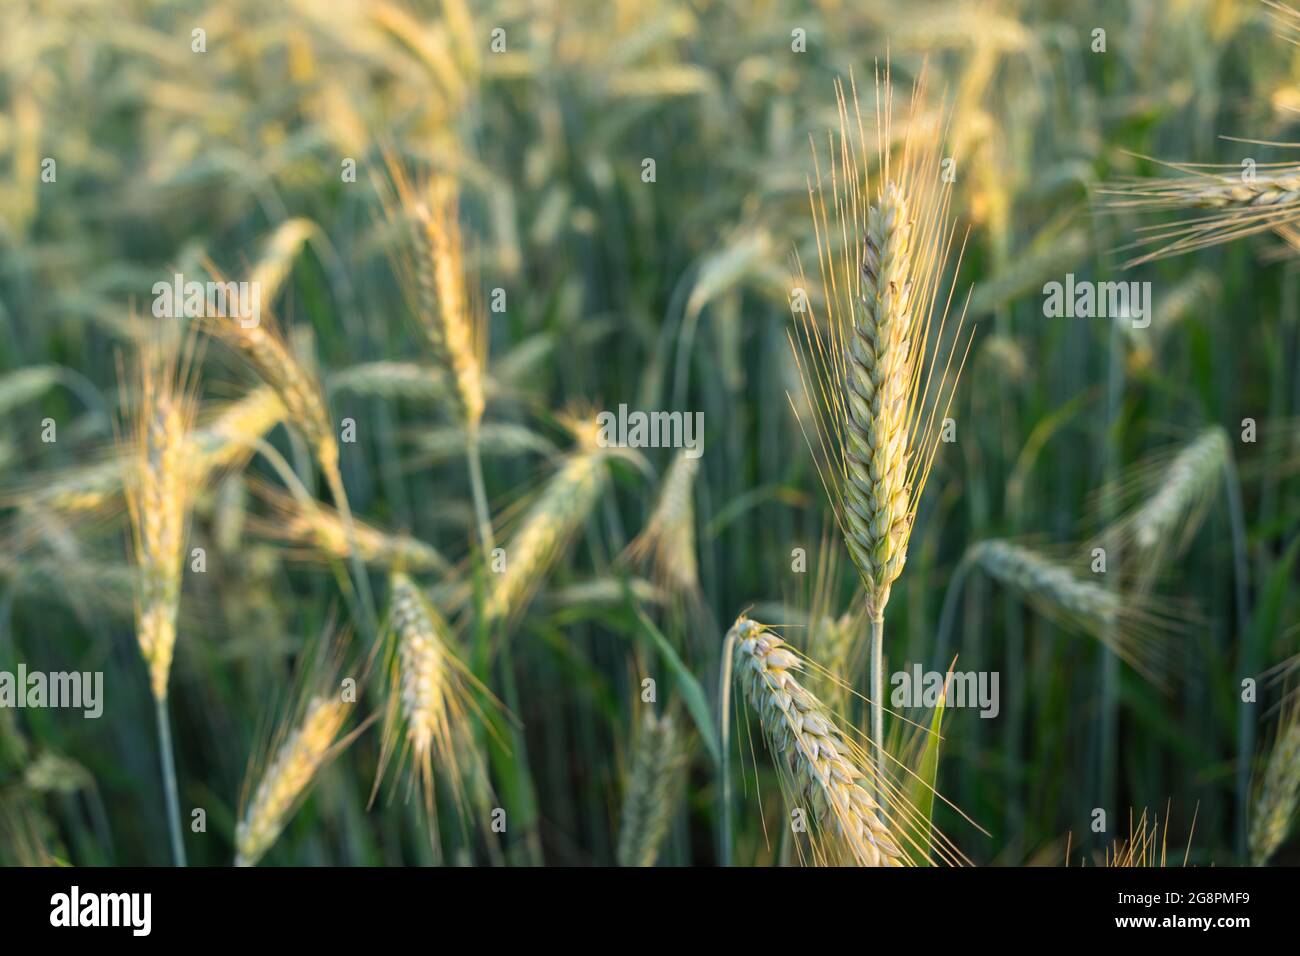 wheat ears in warm sunlight agricultural close-up natural grain field Stock Photo